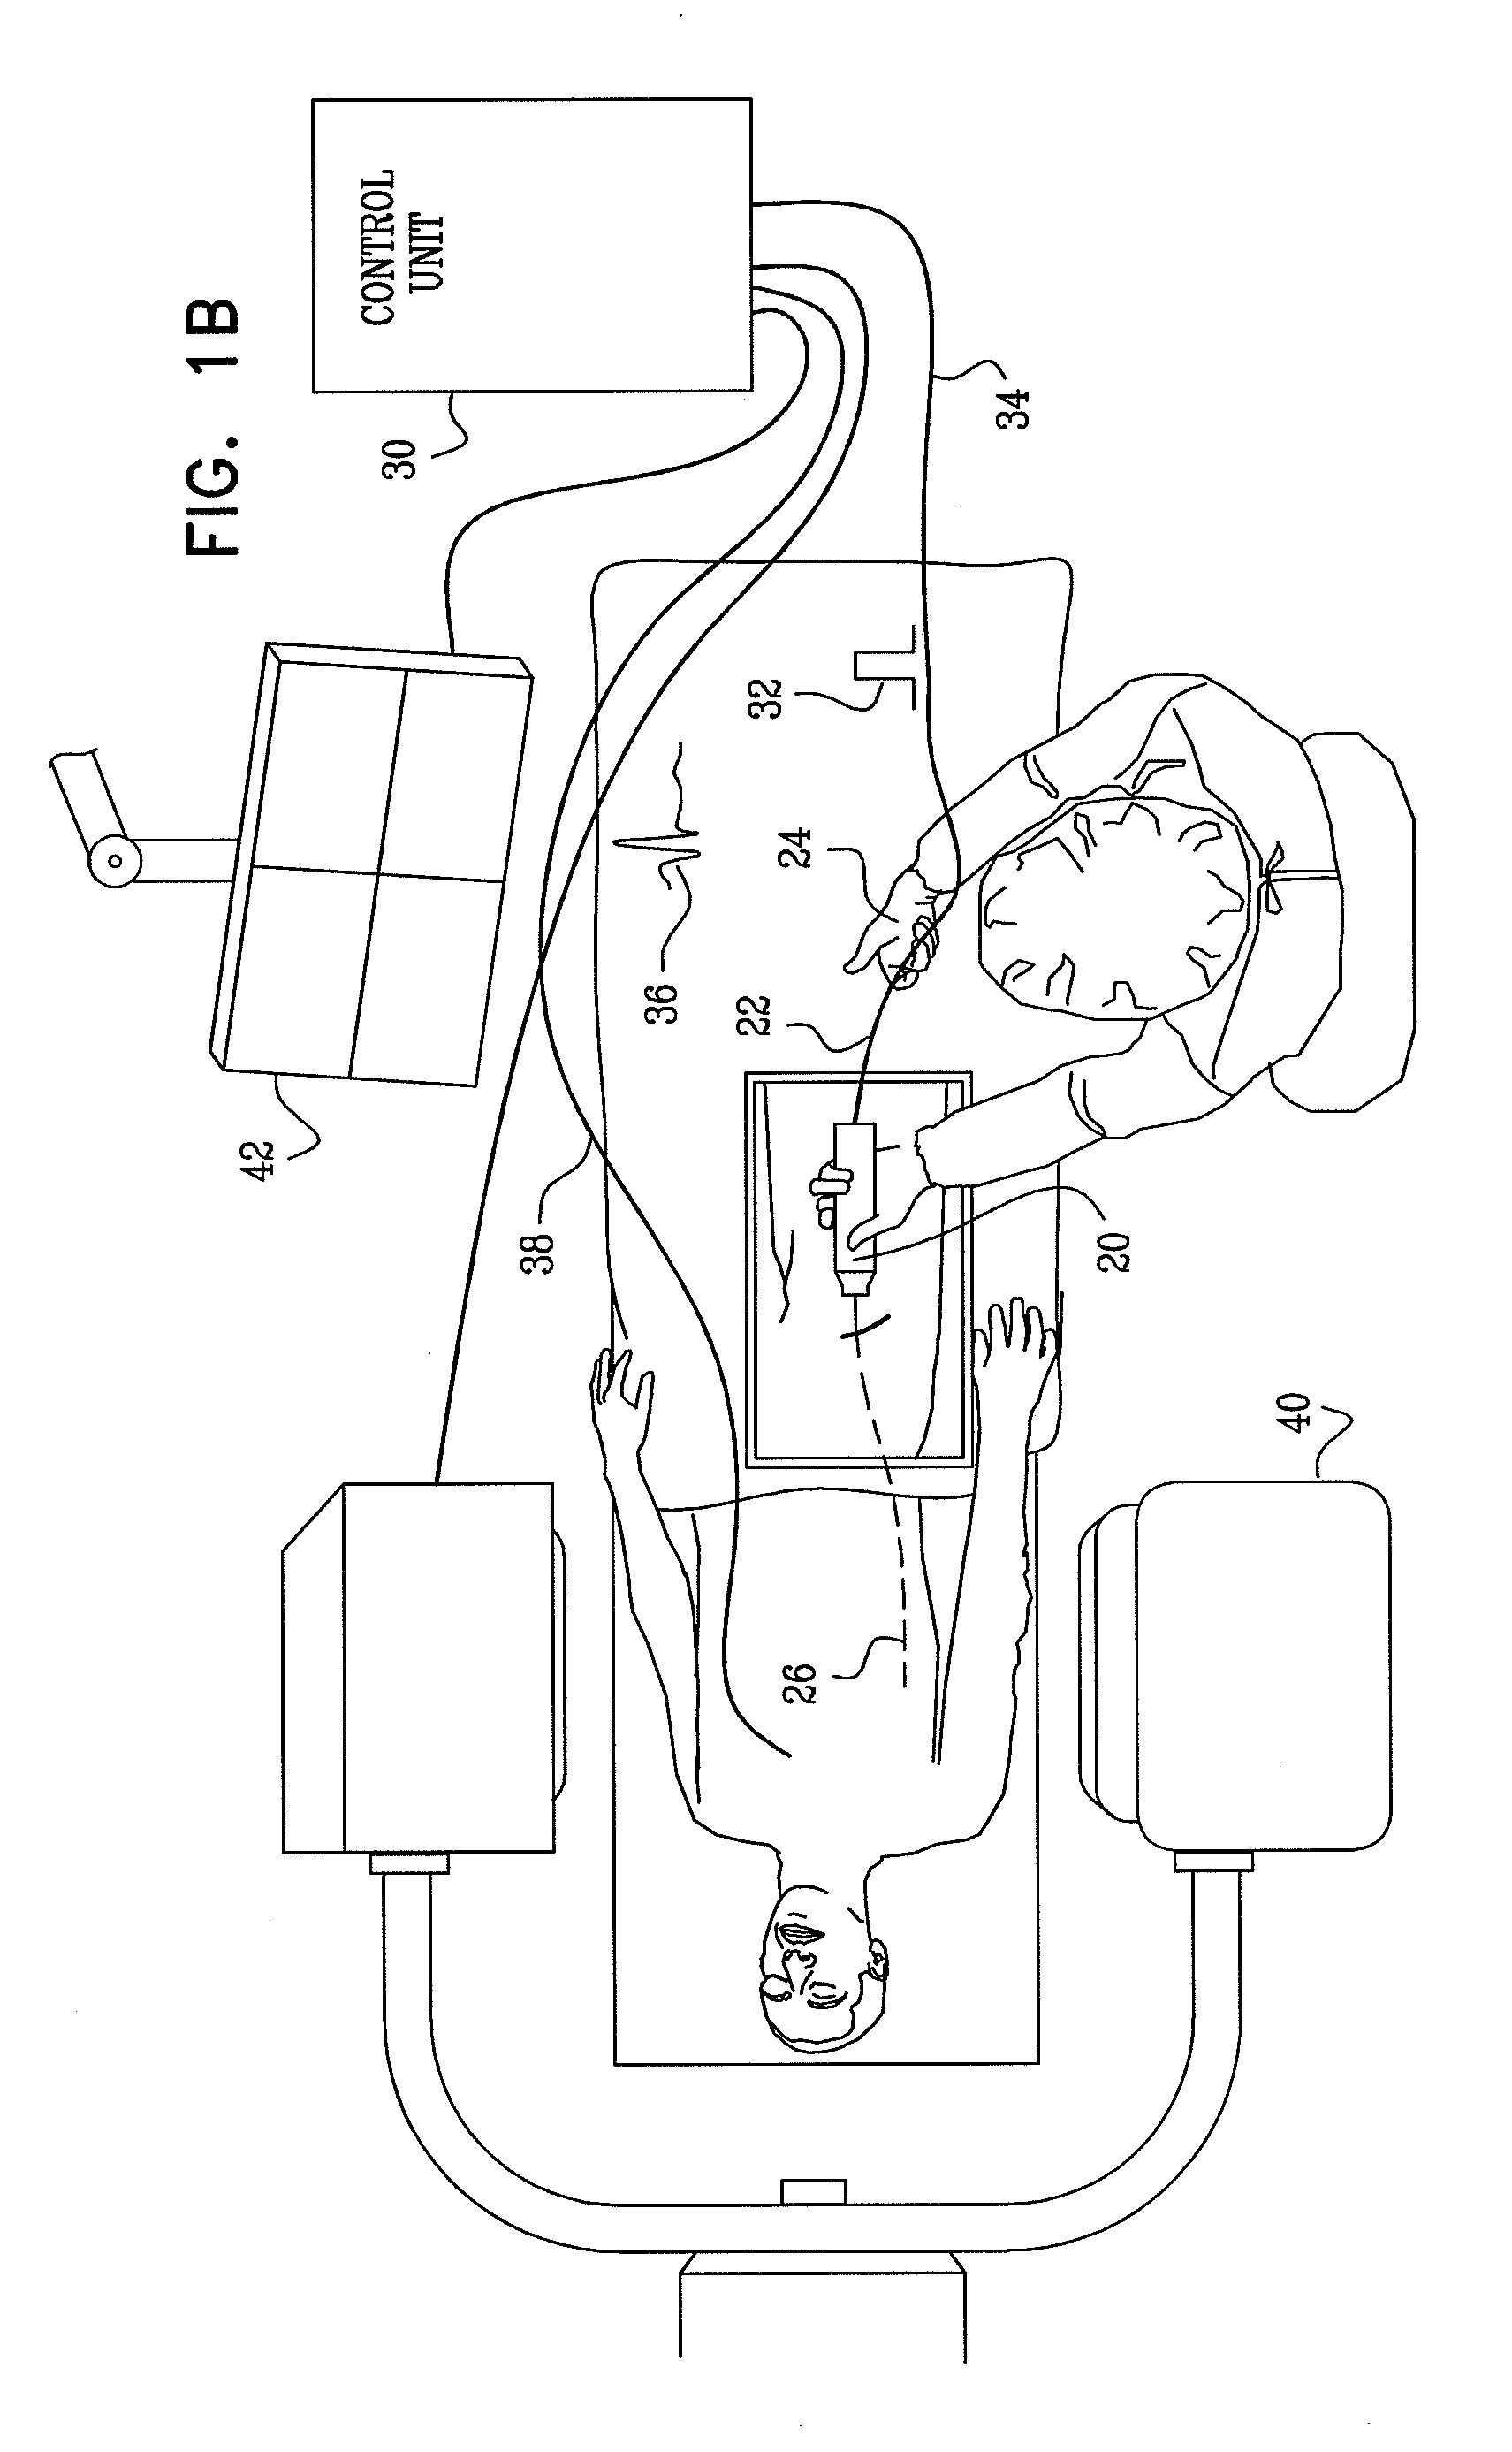 Stepwise advancement of a medical tool